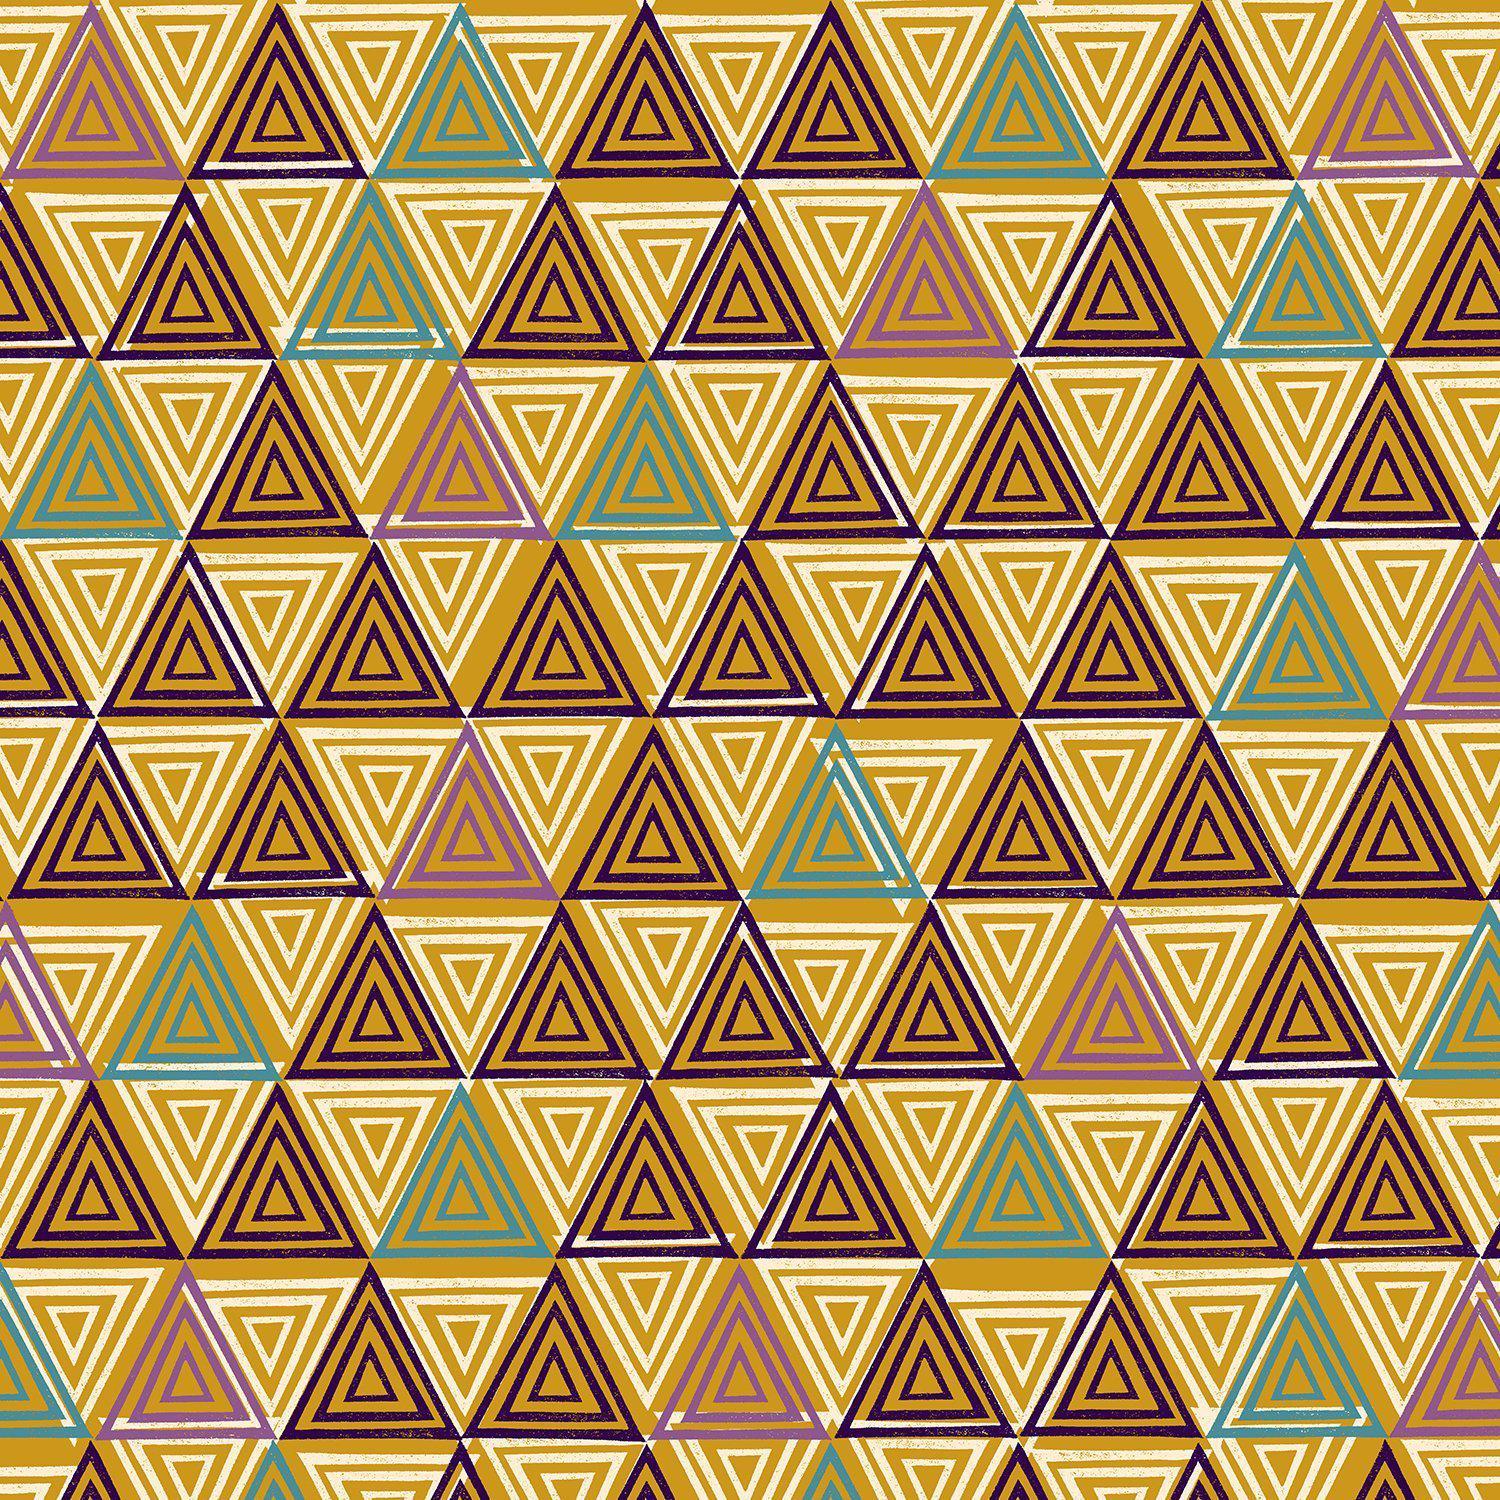 RJR-Triangle Amber-fabric-gather here online